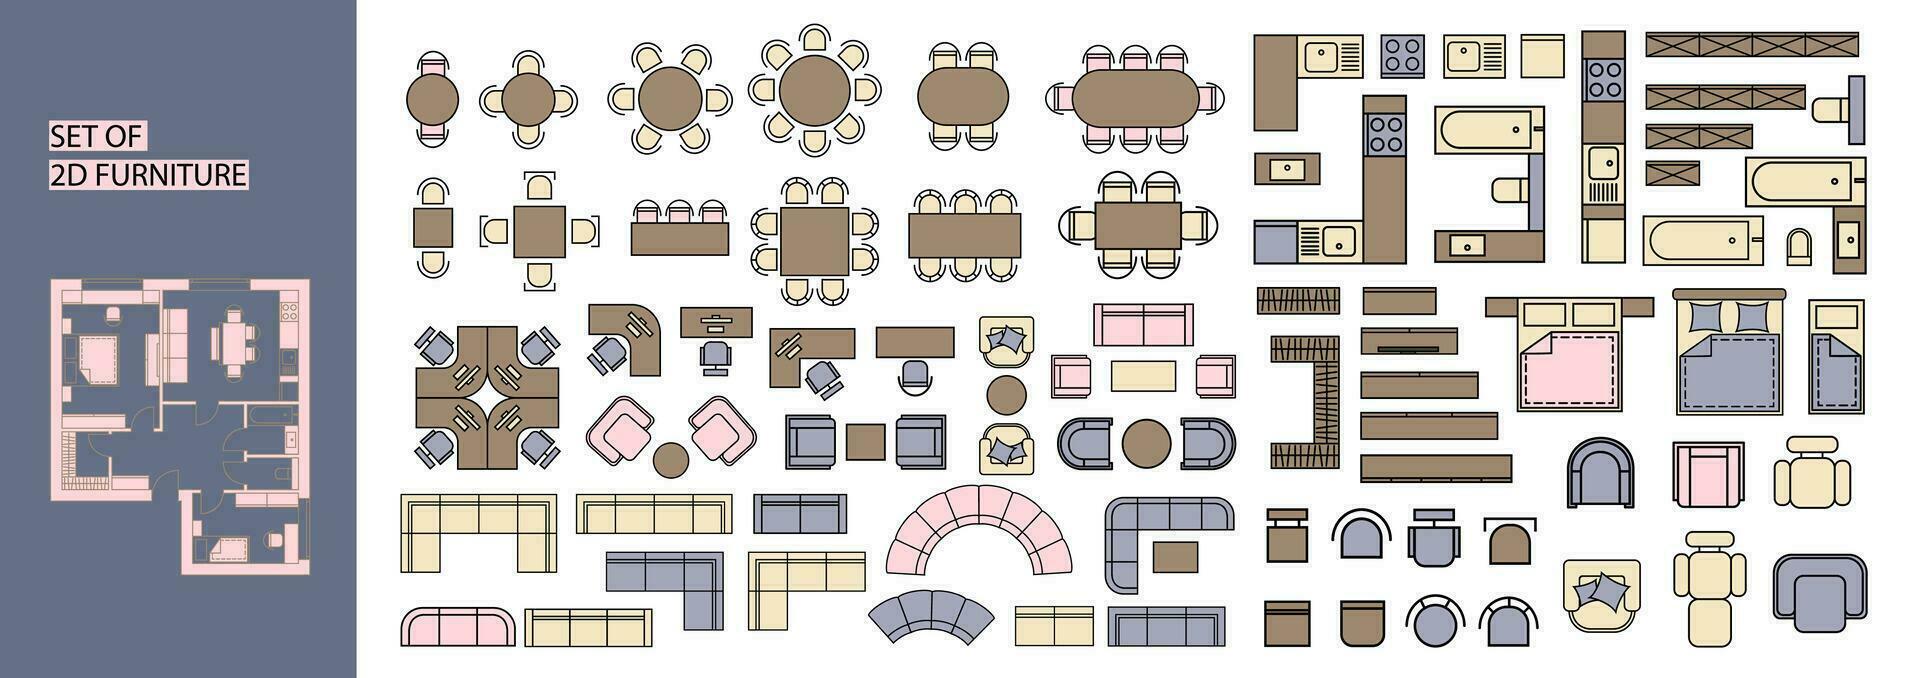 Furniture for the floor plan. Top view tables, beds, chairs, sofas, wardrobes, kitchen furniture, etc. Perfect for interior mood boards and planning sketches. Architectural. vector